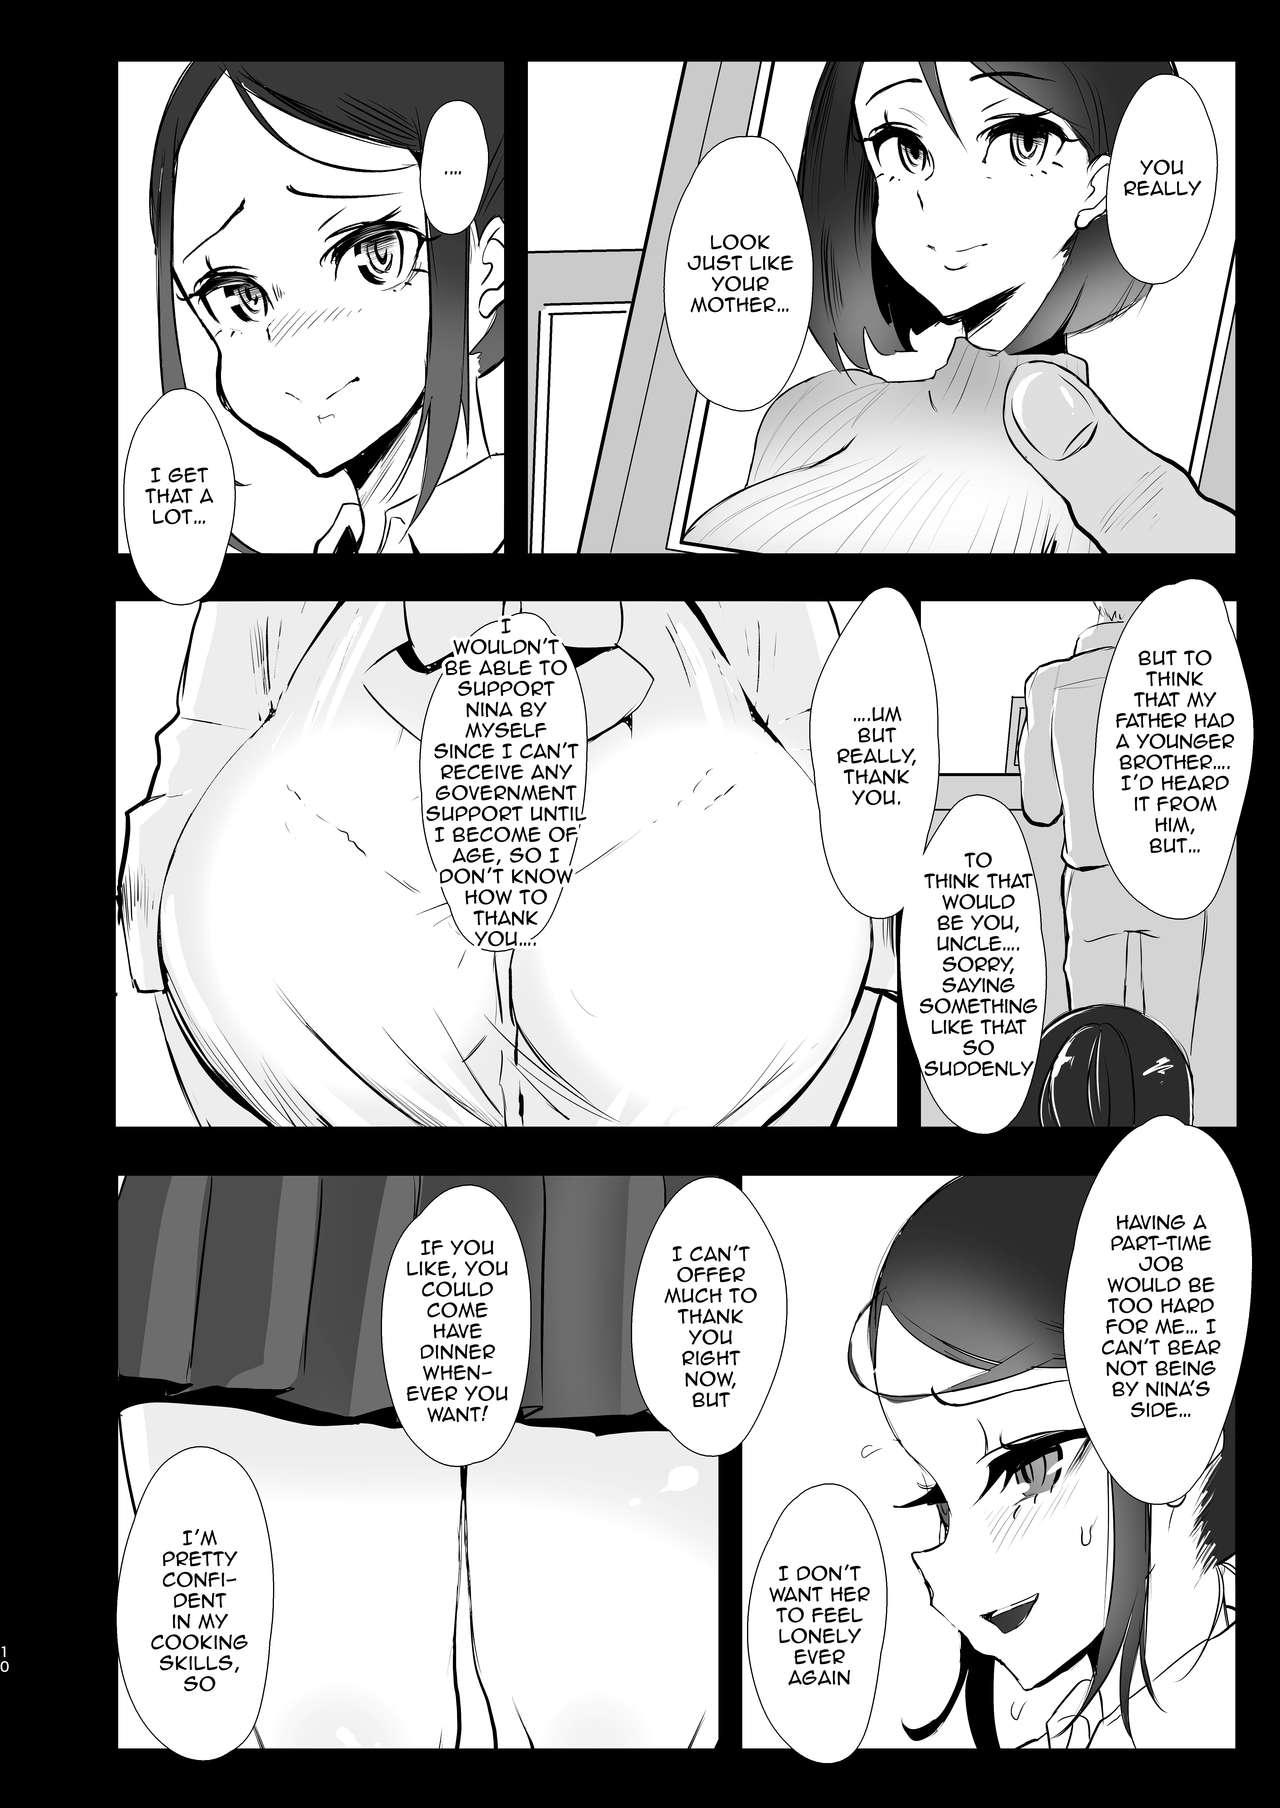 Amature Porn Himawari no Kage | The Other Side of the Sunflower - Original Adolescente - Page 9